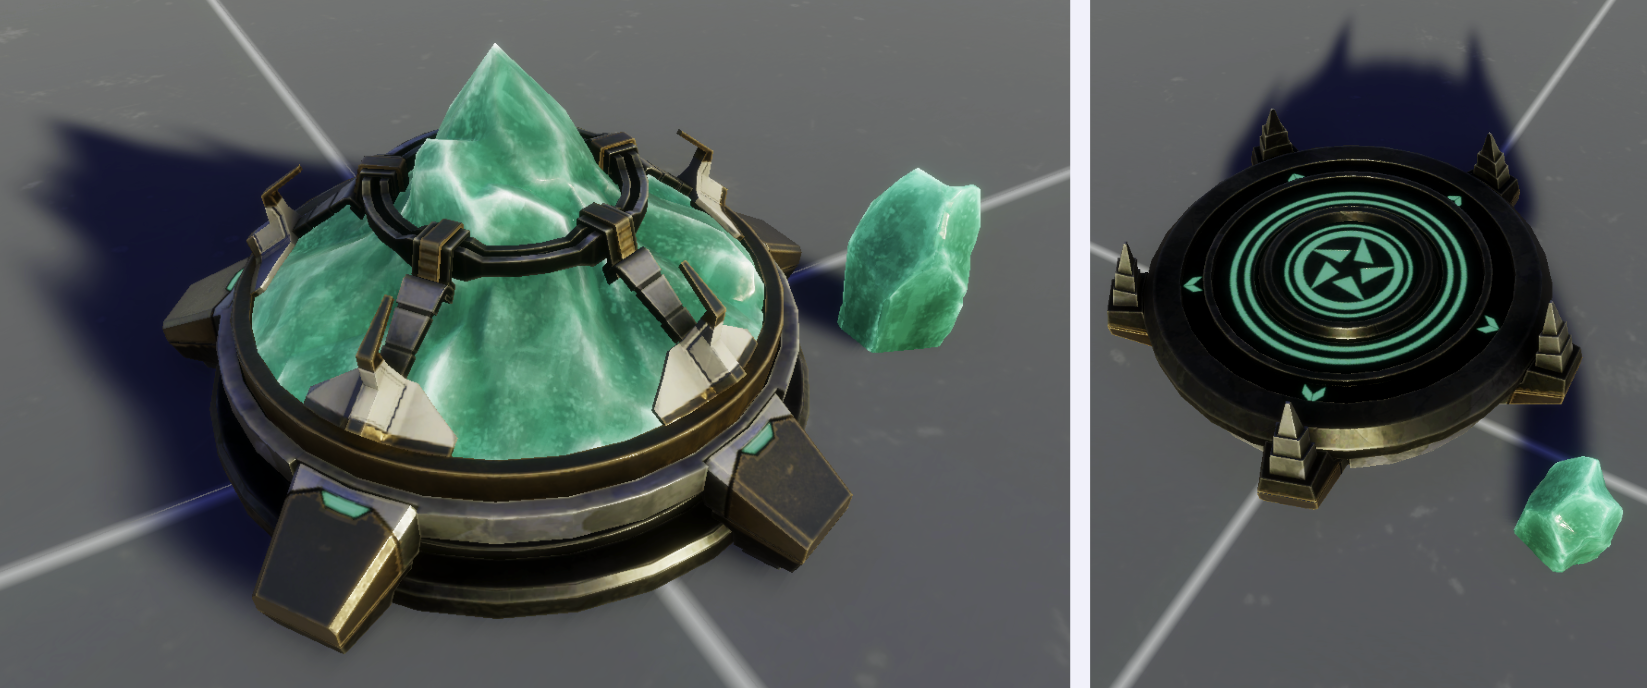 The Atlas crystal will eventually be emissive, and will glow when charged. The lifter will eventually run out of charge.